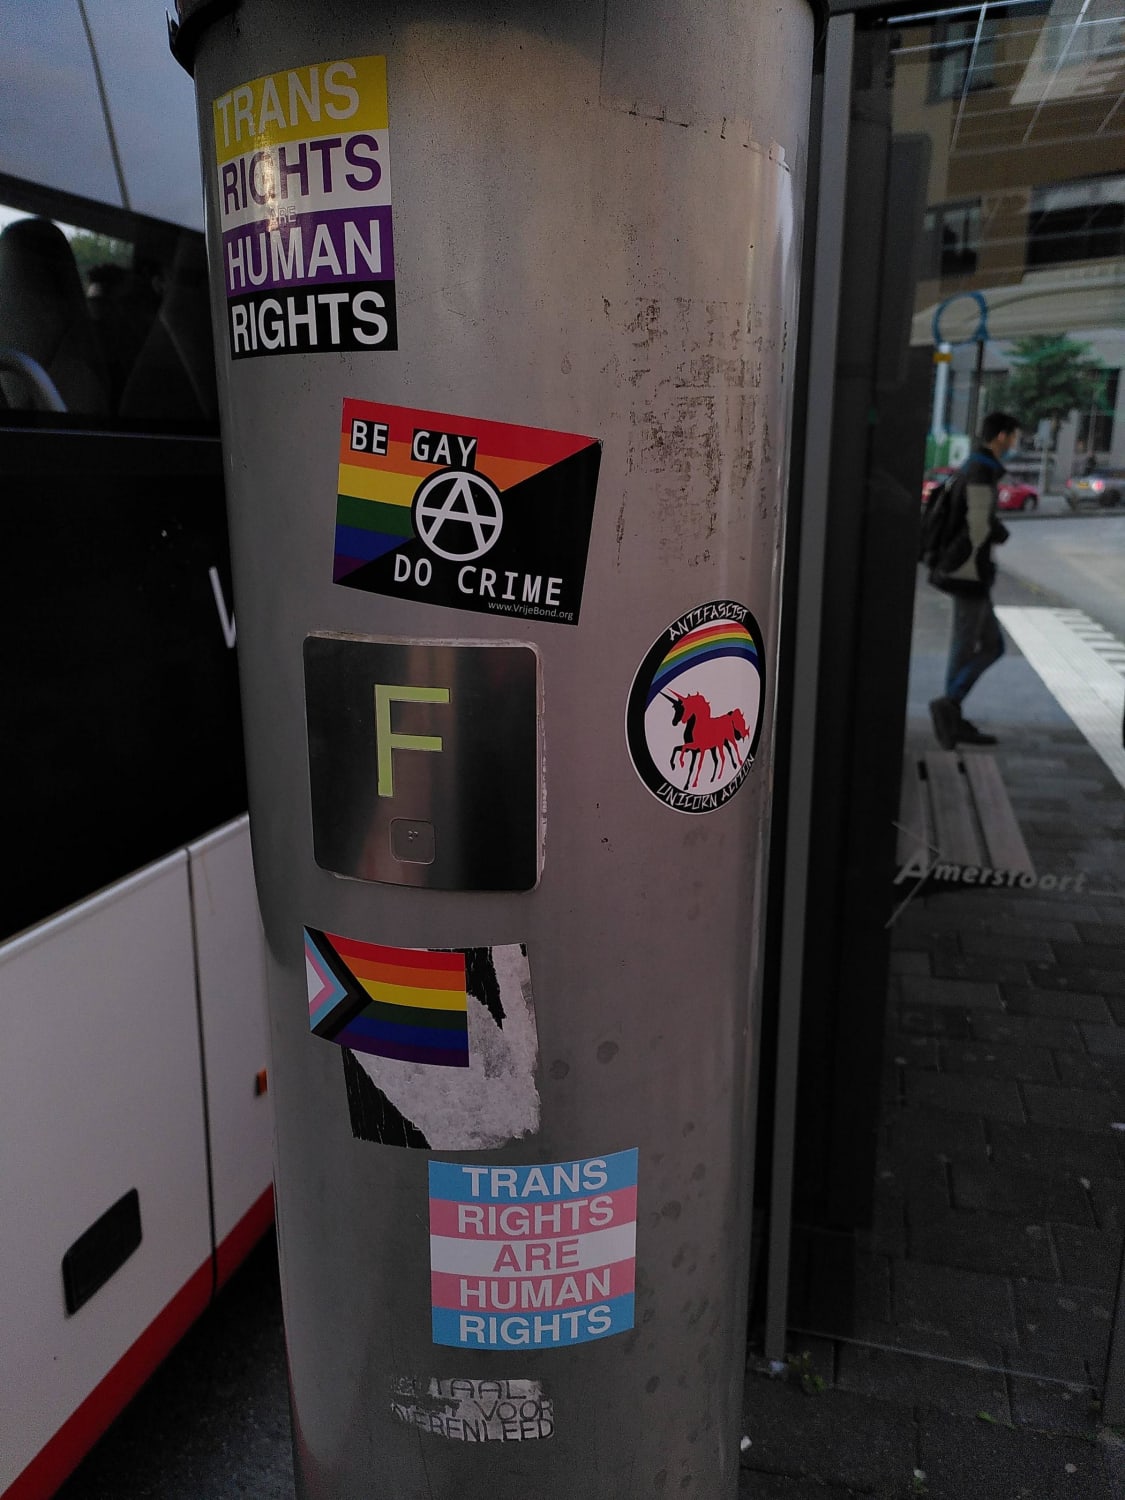 Spreading more LGBT stickers around the city